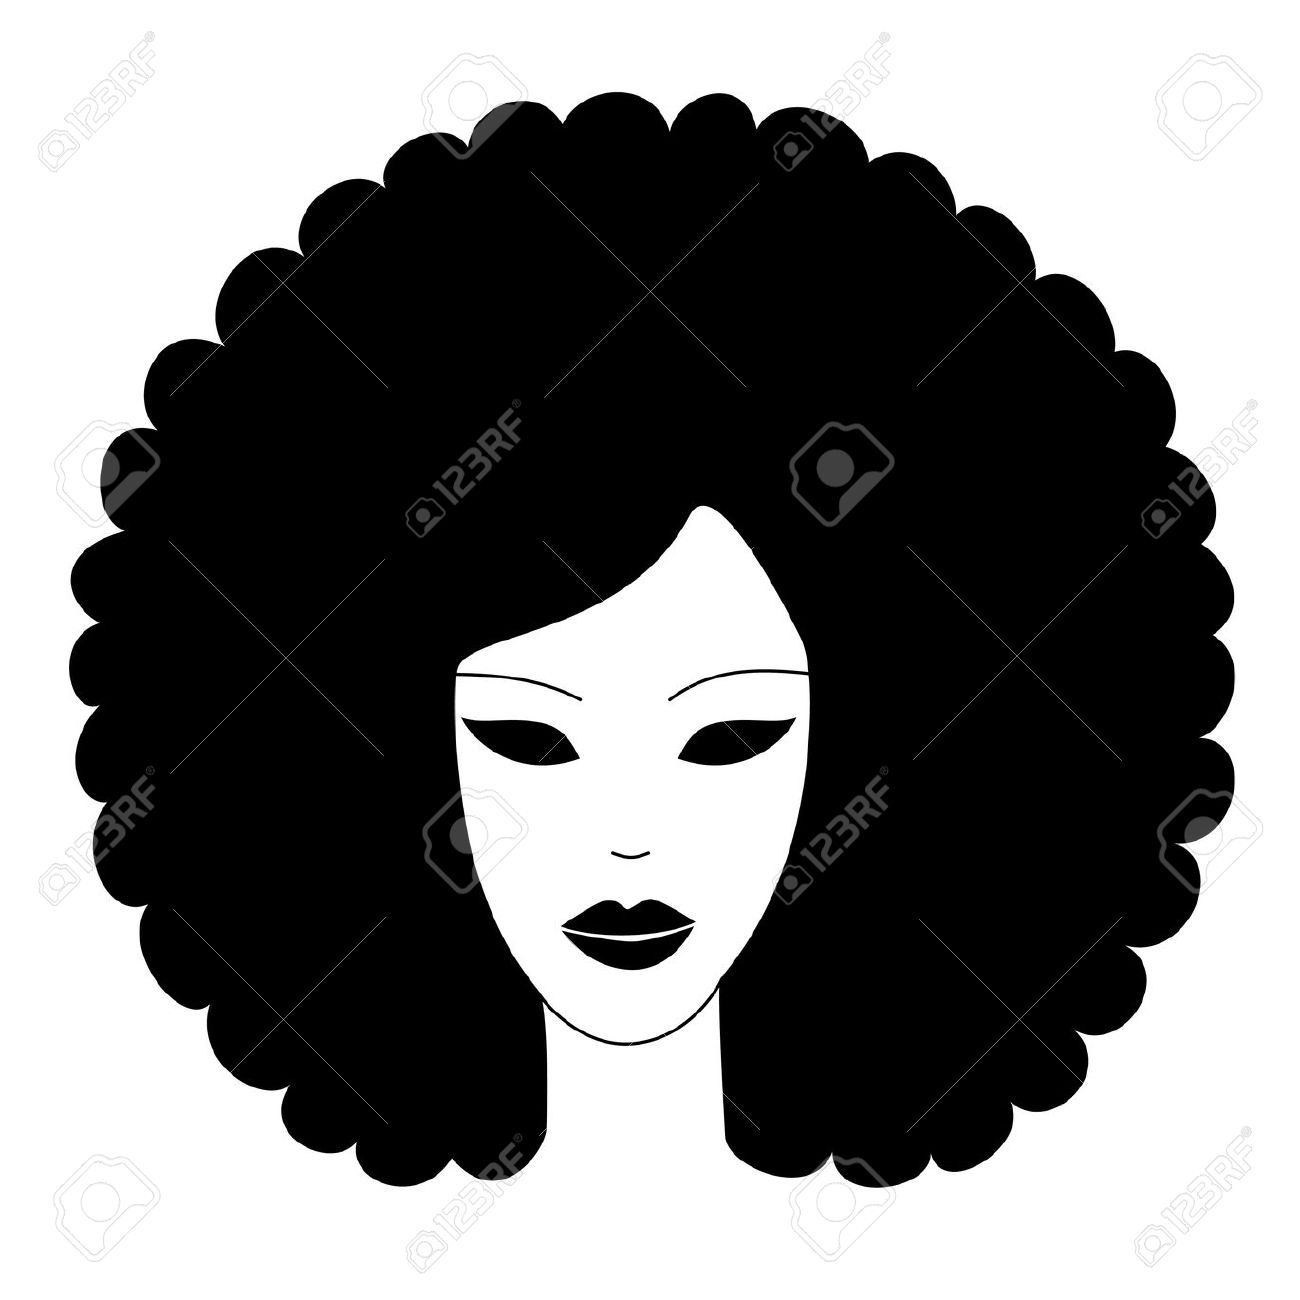 Afro silhouette